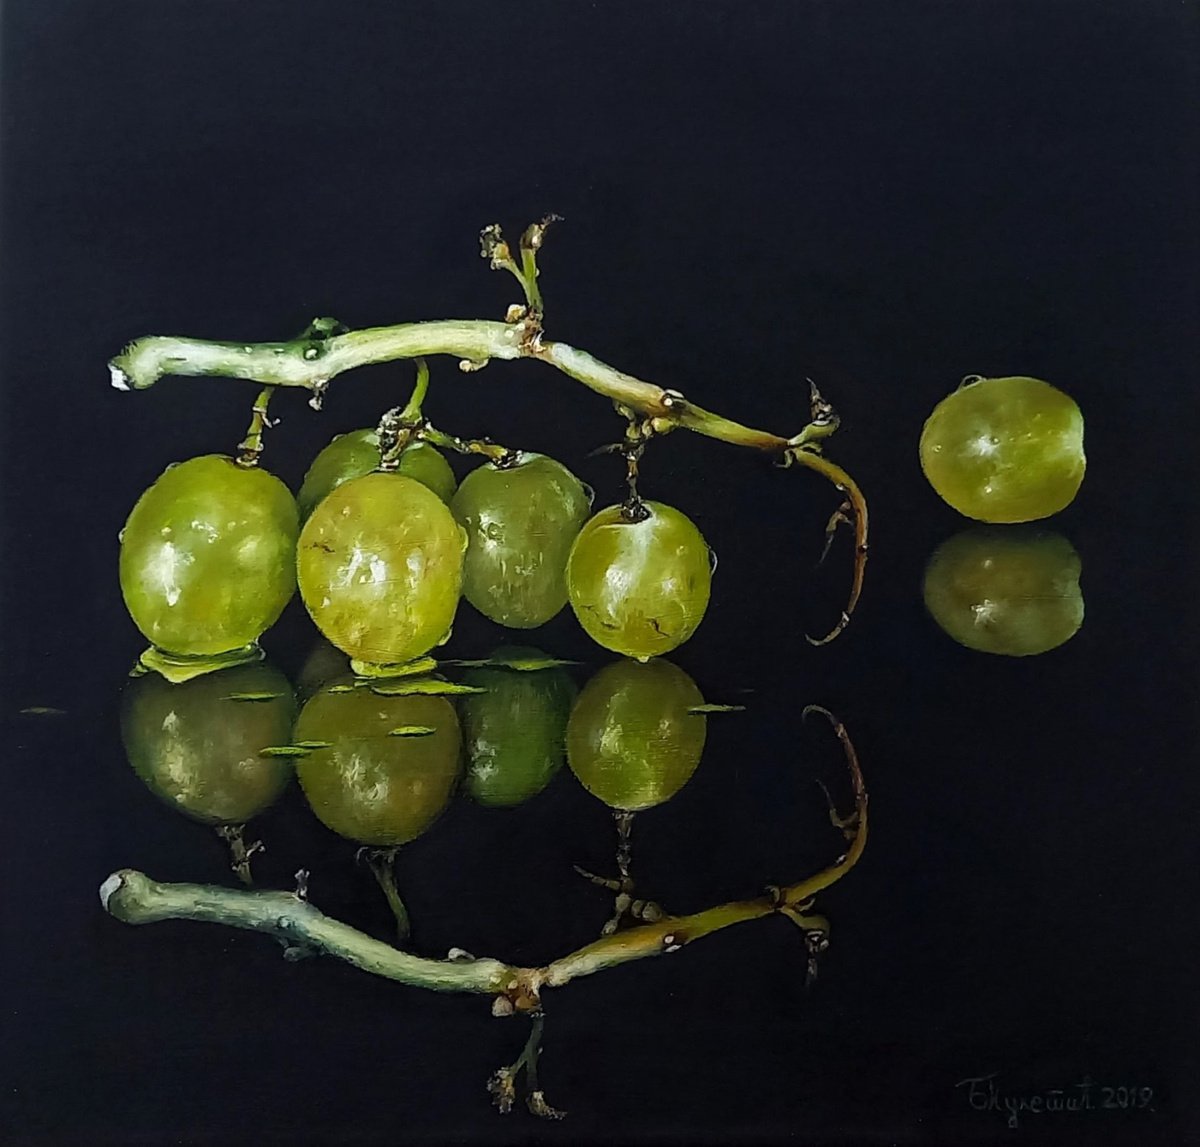 AGAIN GRAPES AND REFLECTION by Branislav Puletic